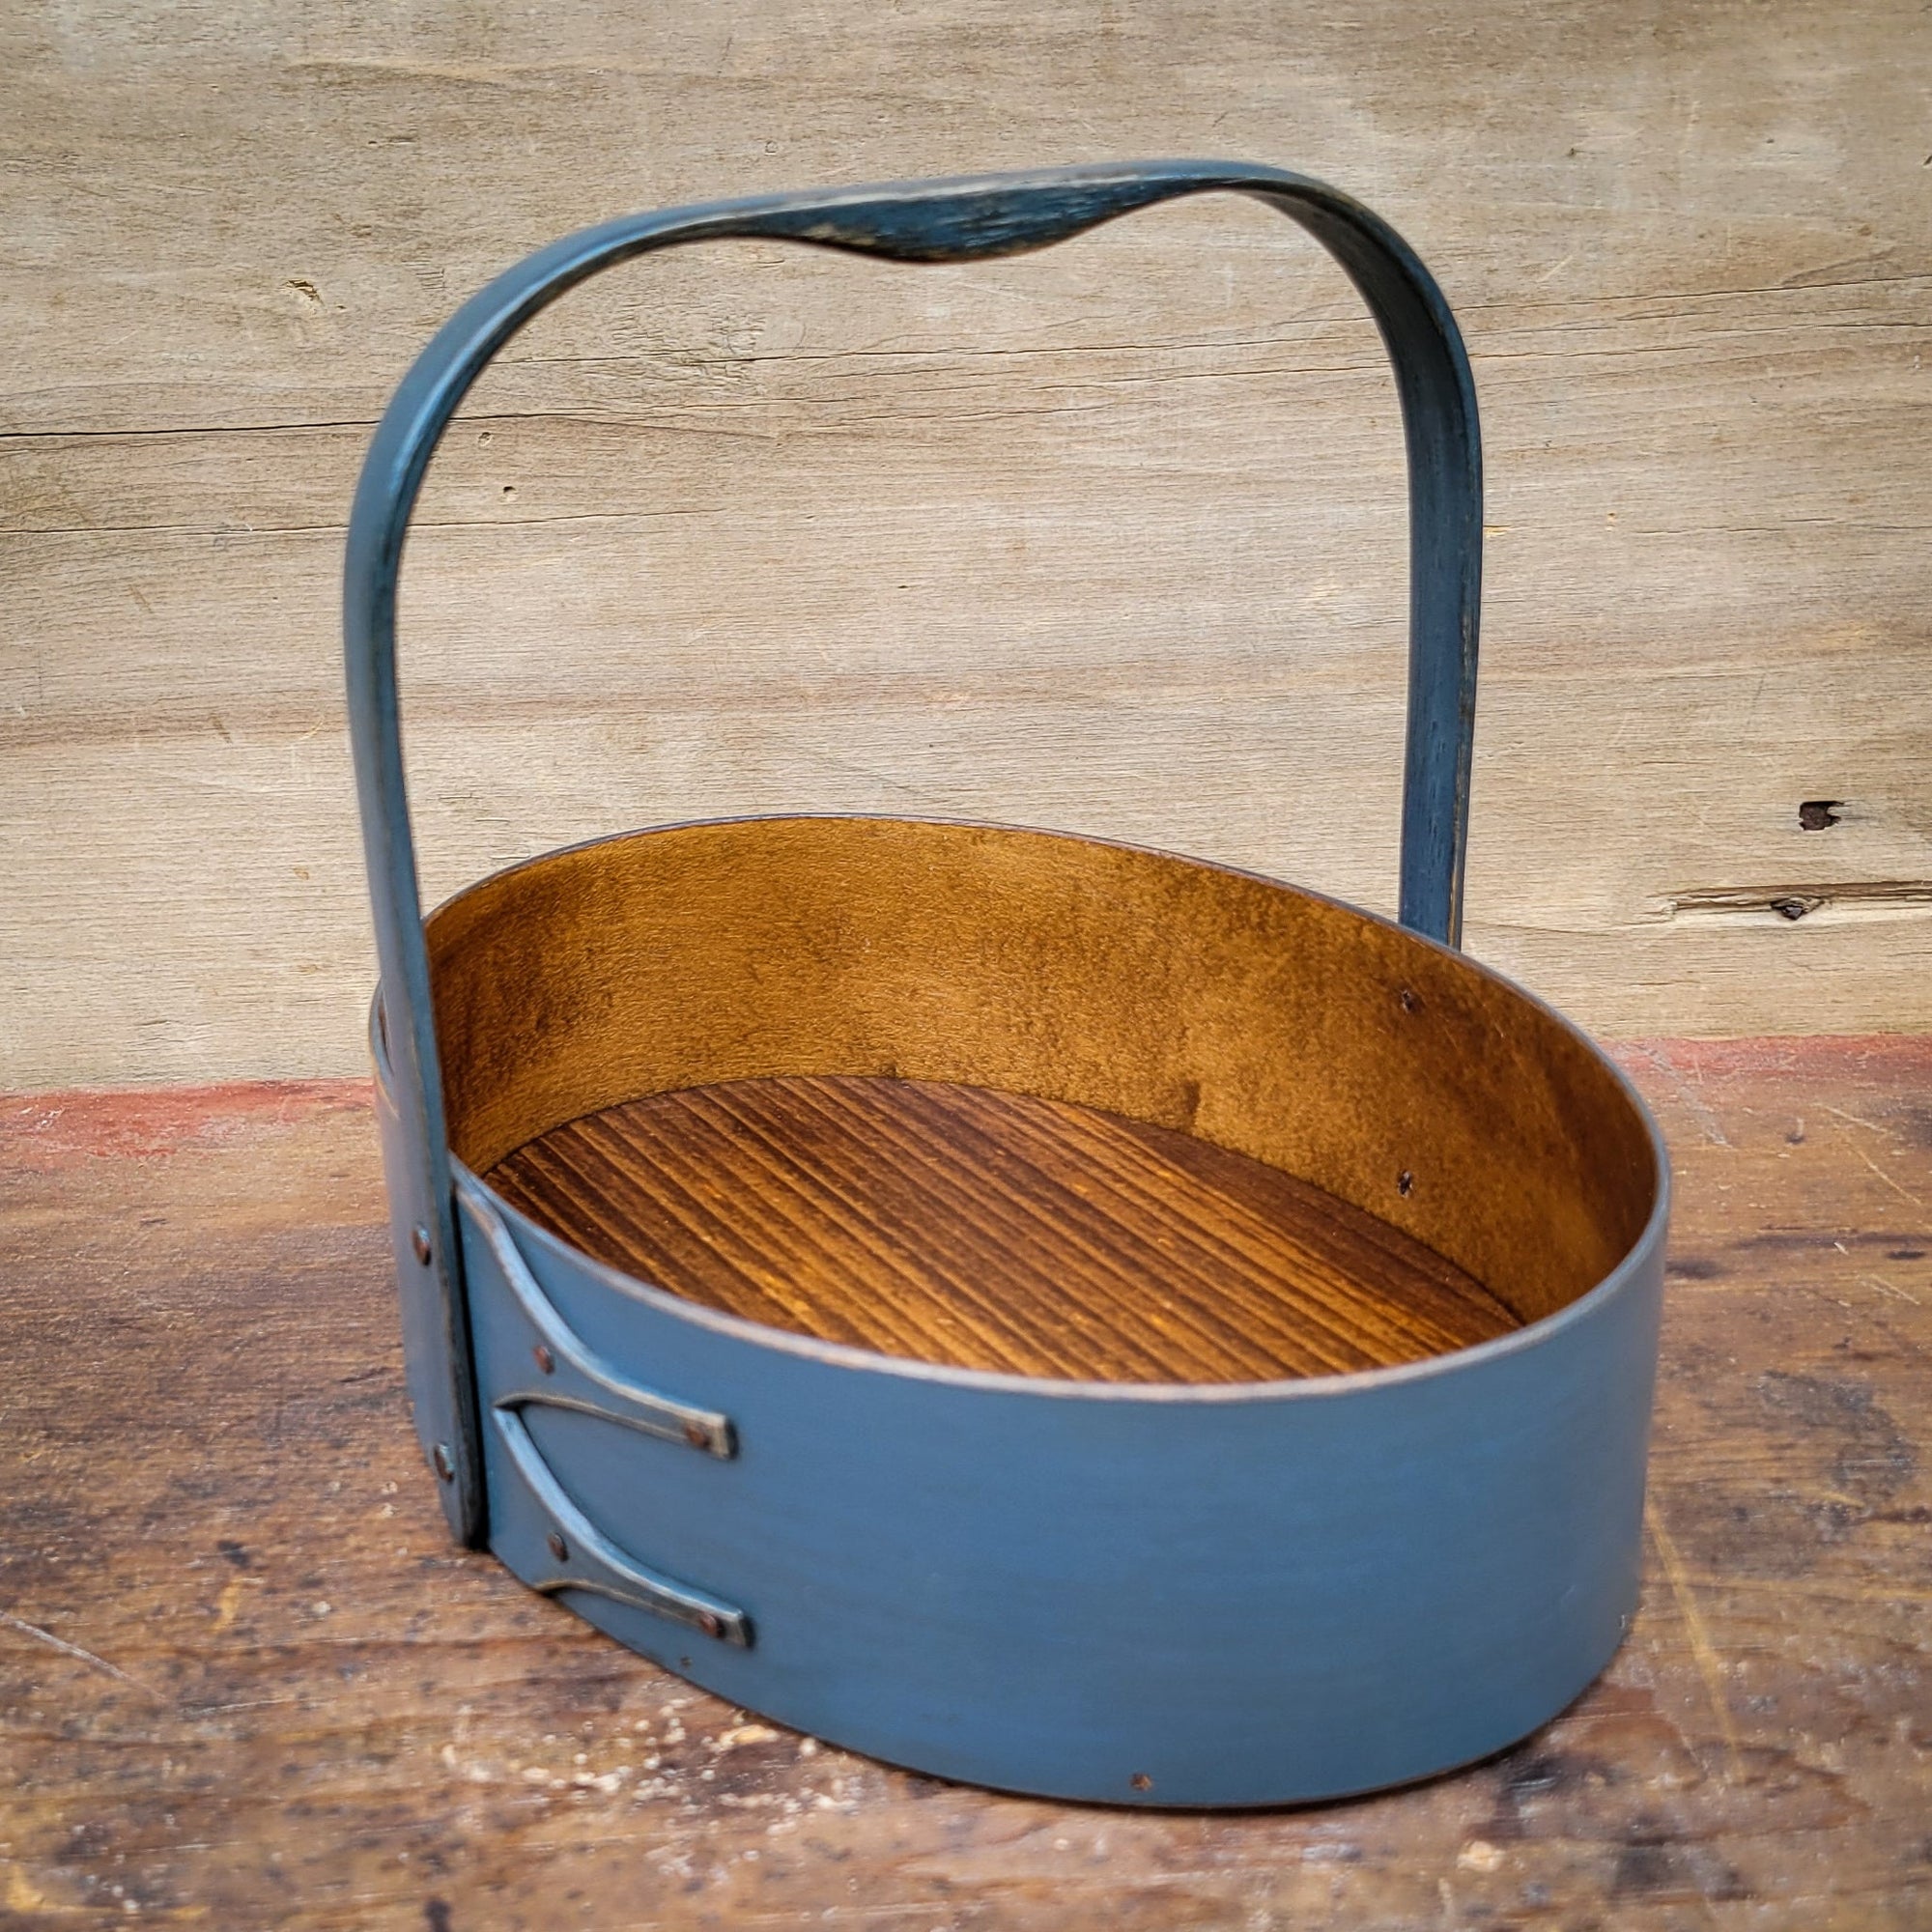 Small Shaker Style Sewing Carrier, LeHays Shaker Boxes, Handcrafted in Maine, Blue Milk Paint Finish, Side View